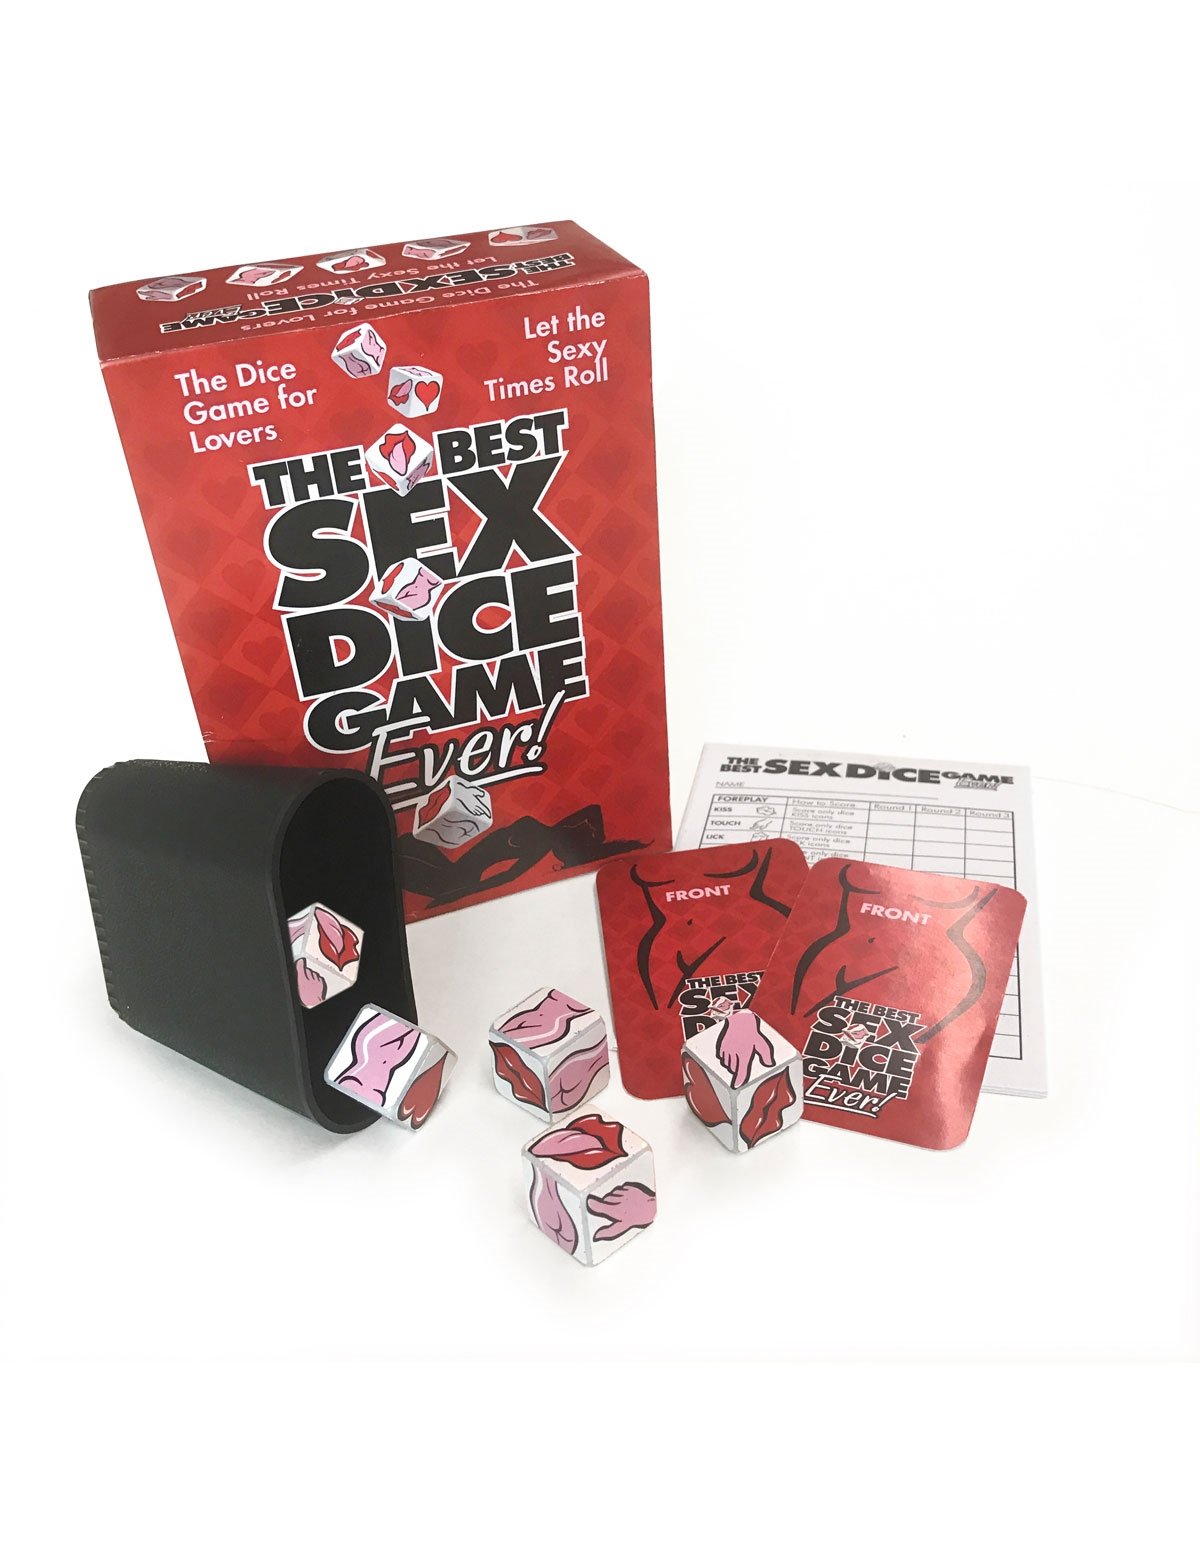 alternate image for The Best Sex Dice Game Ever